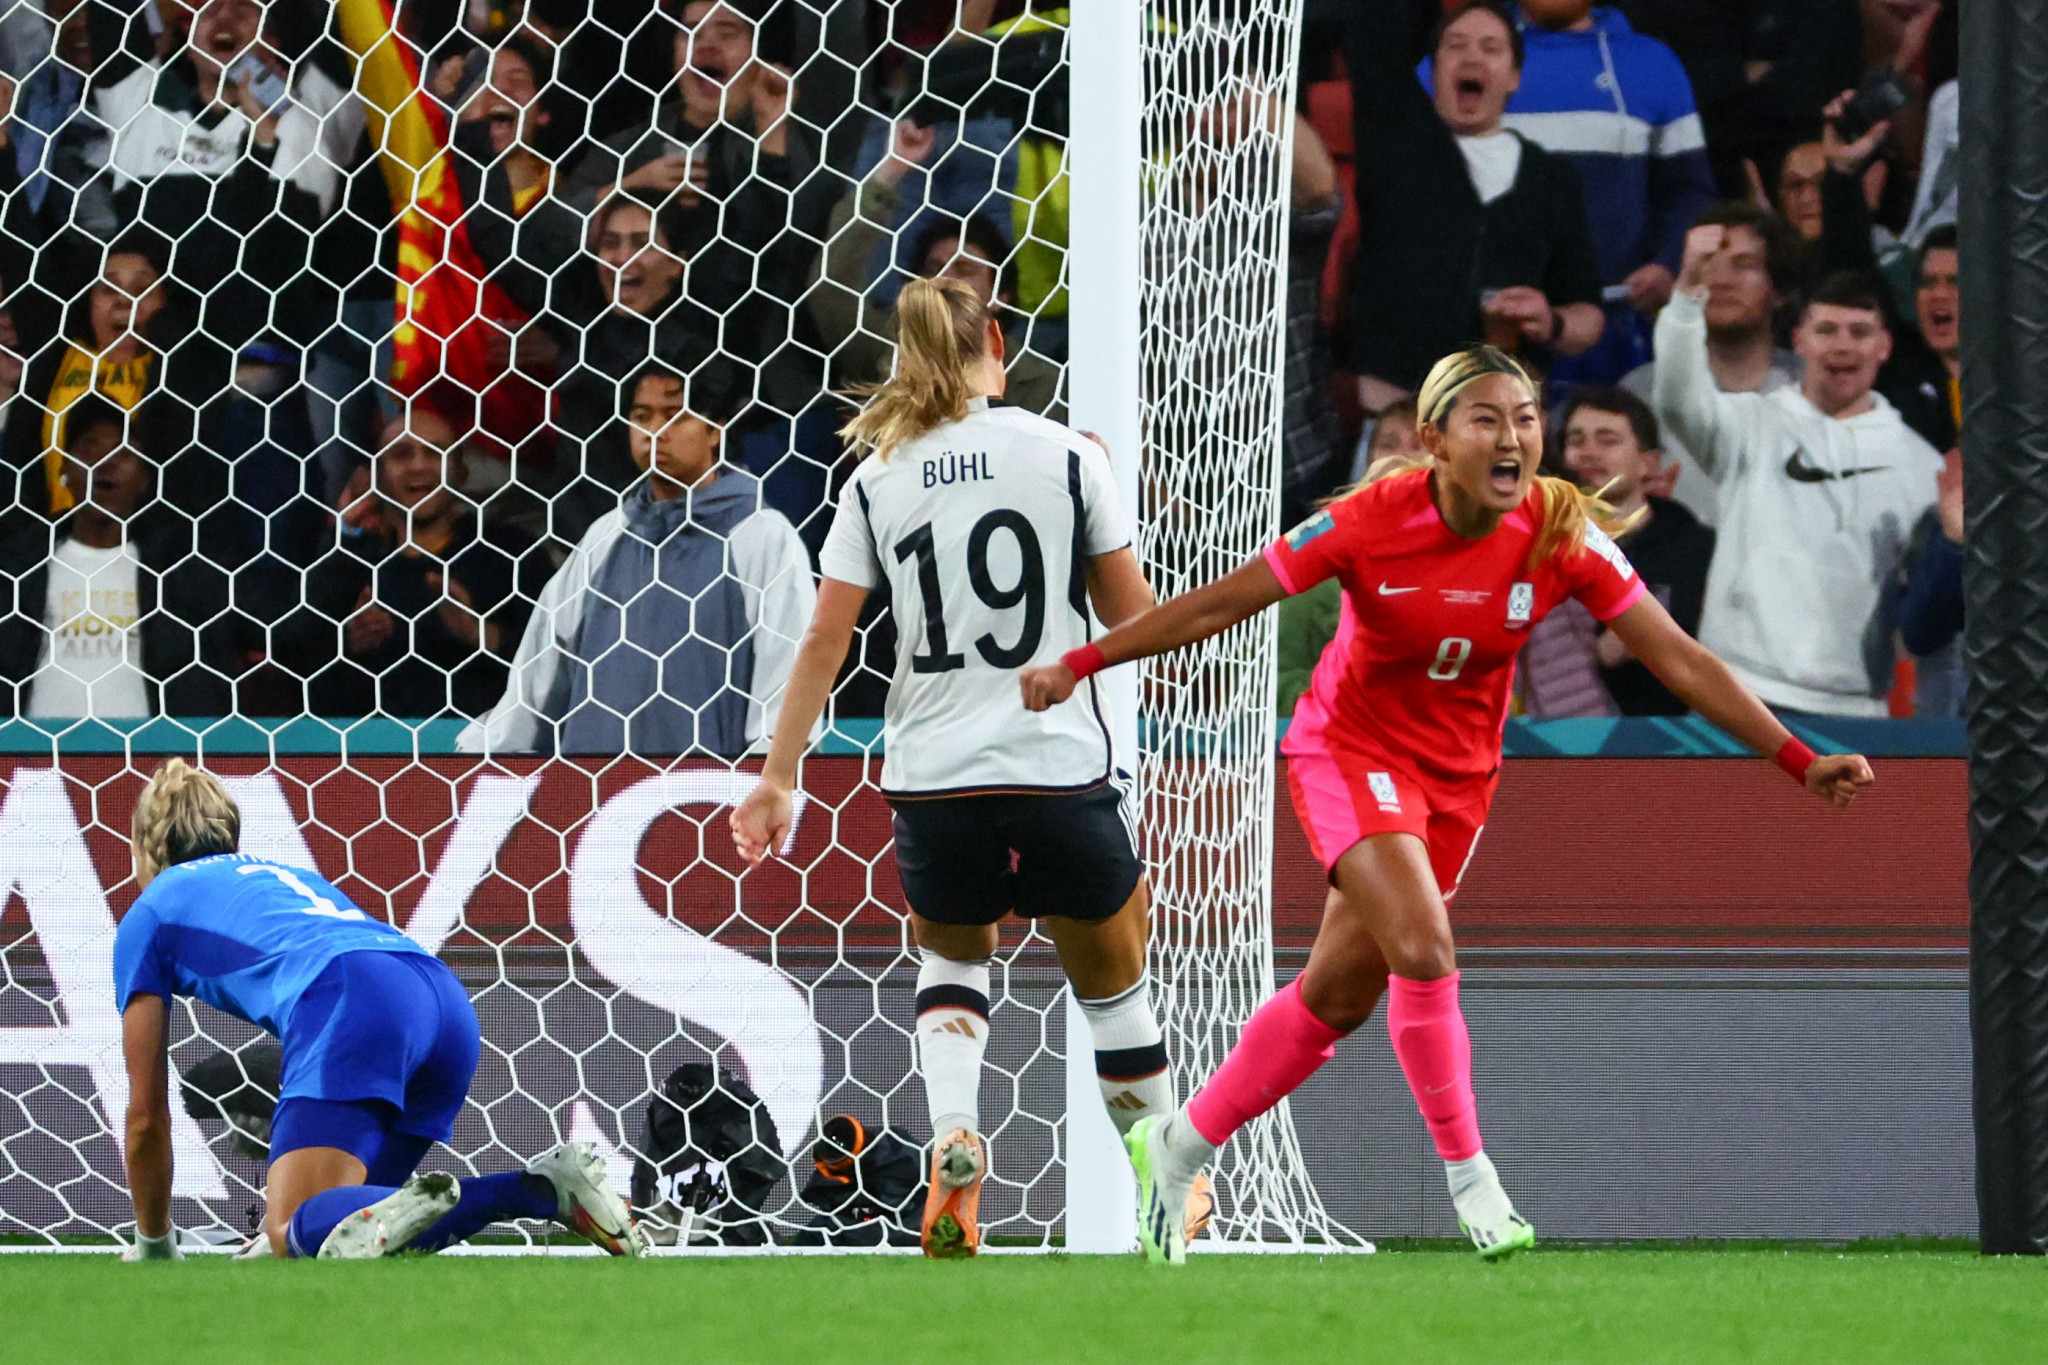 Two-time champions Germany eliminated from FIFA Women's World Cup at earliest stage in history